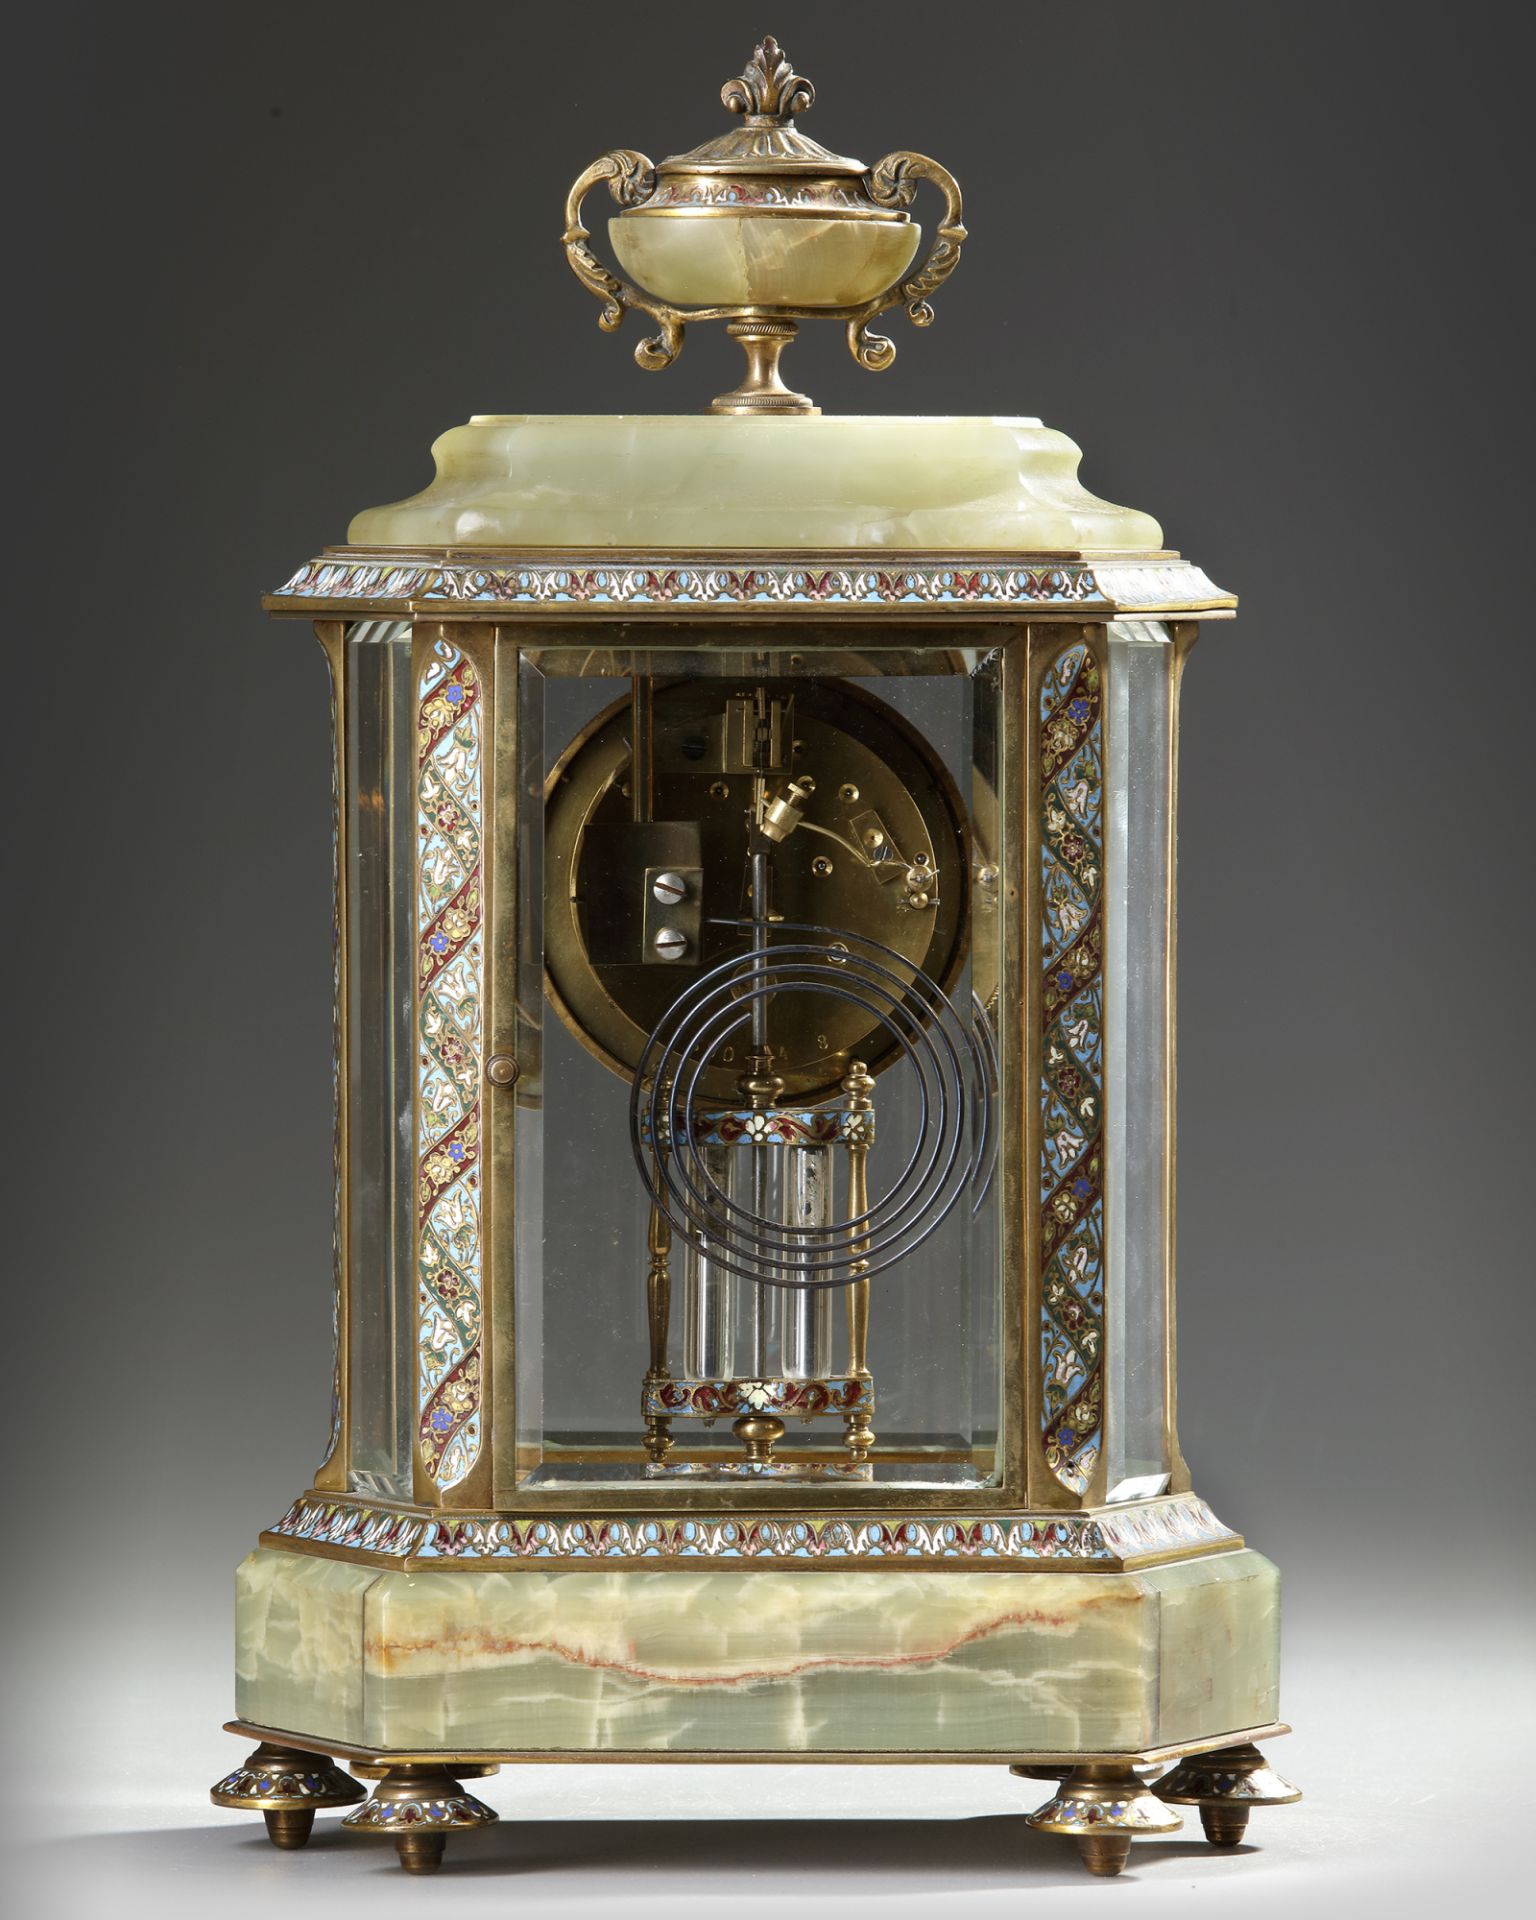 A FRENCH BRONZE AND CHAMPLEVÉ ENAMEL MANTEL CLOCK, 19TH CENTURY - Image 3 of 3